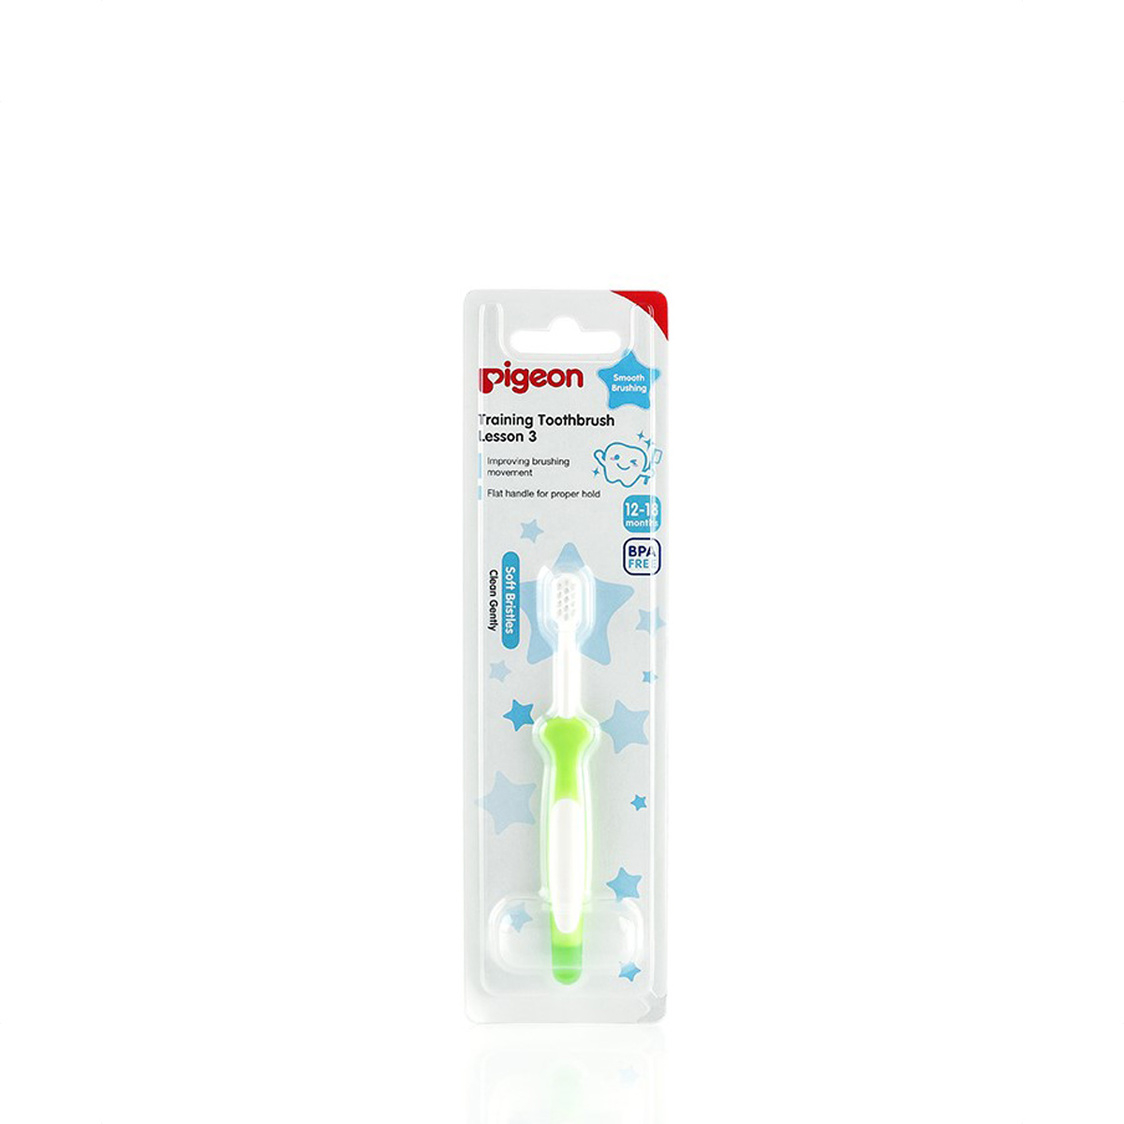 Pigeon Training Toothbrush Lesson 3 Green